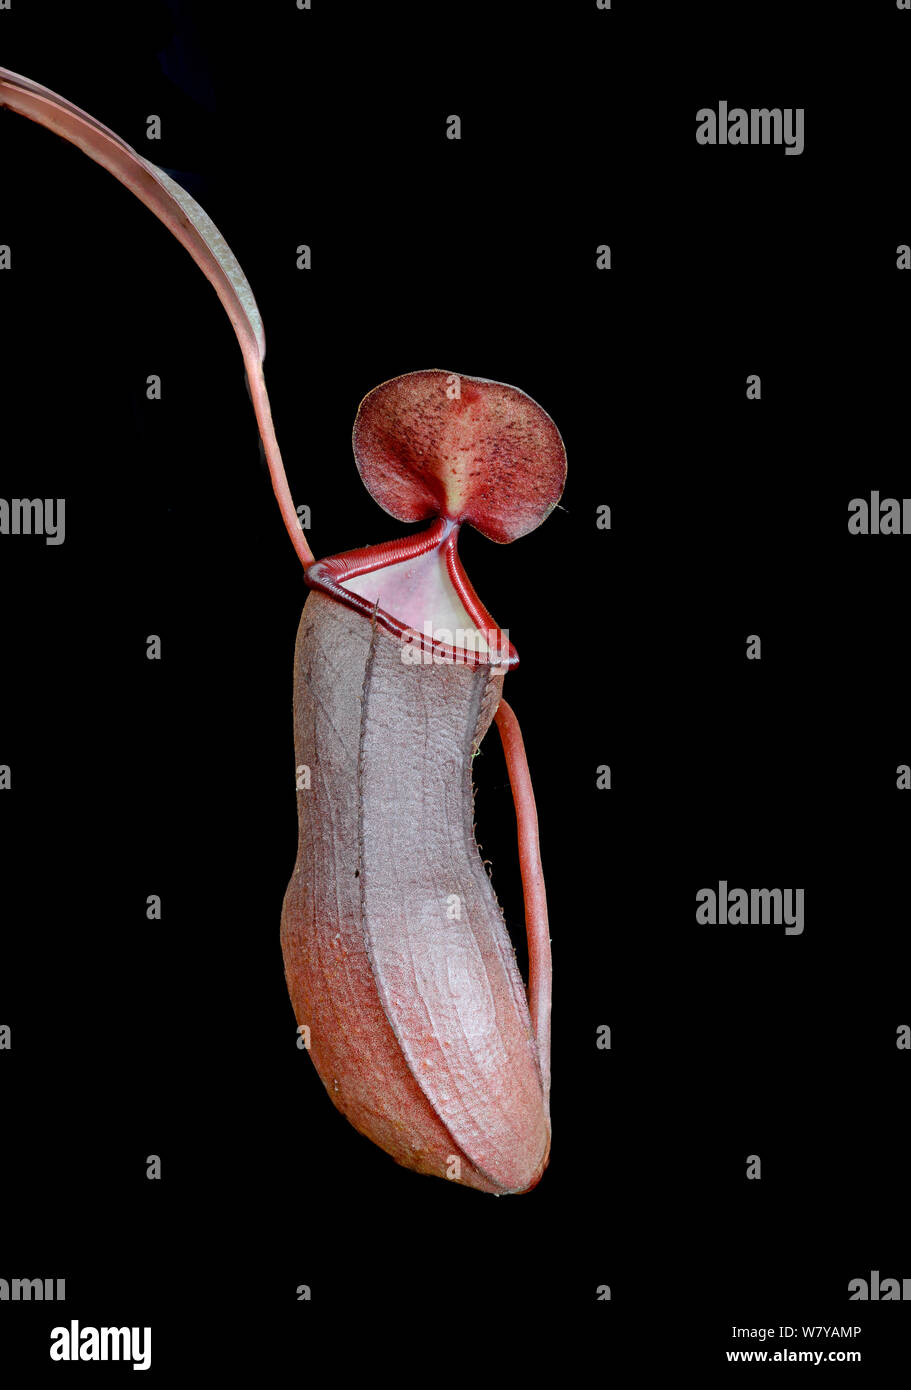 Pitcher plant (Nepenthes sanguinea) Cultivated, occurs in Malaysia and Thailand. Stock Photo